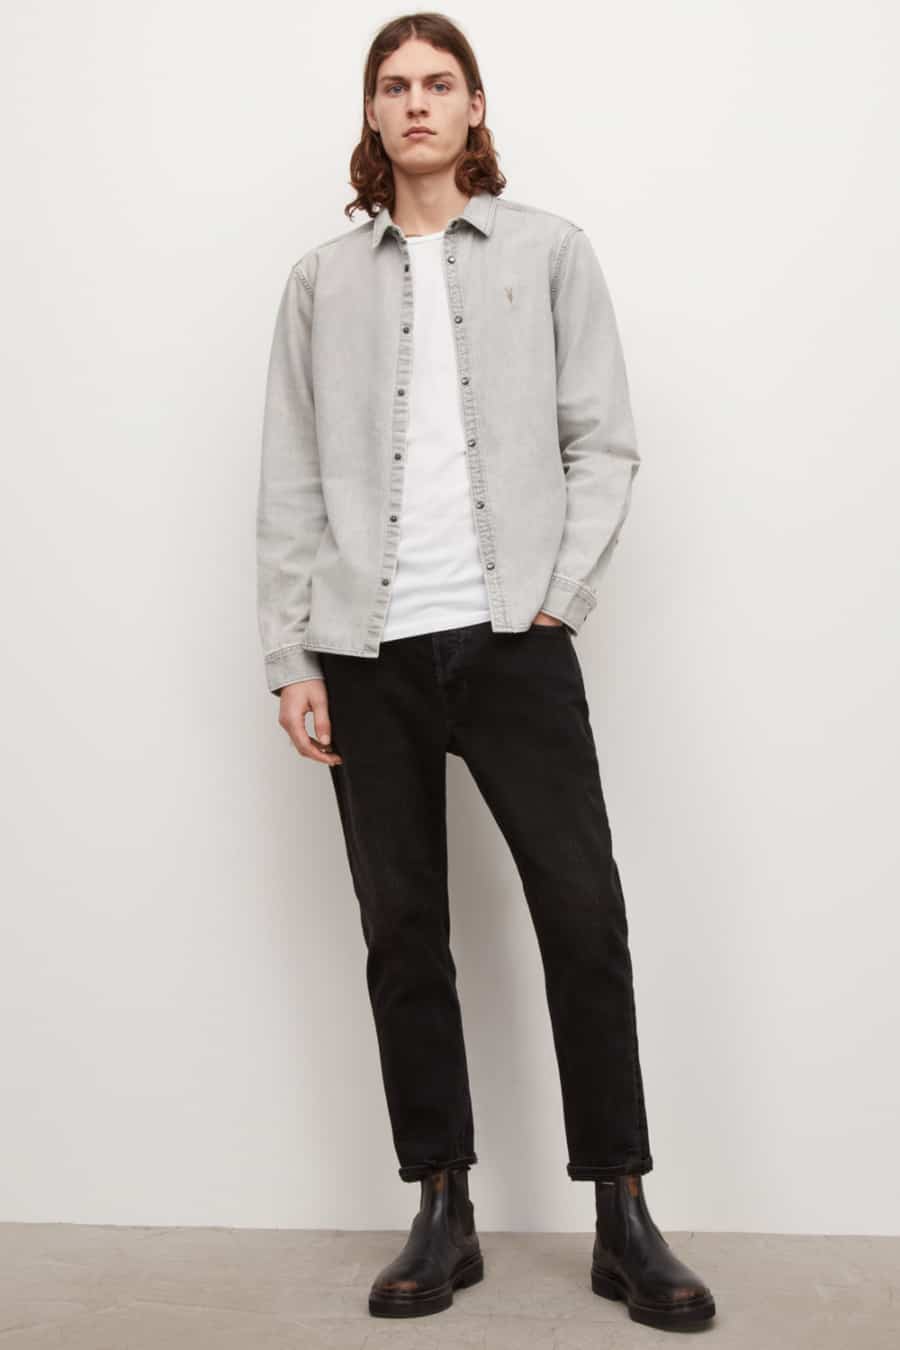 Men's black jeans, white T-shirt, grey denim shirt and brown Chelsea boots double denim outfit